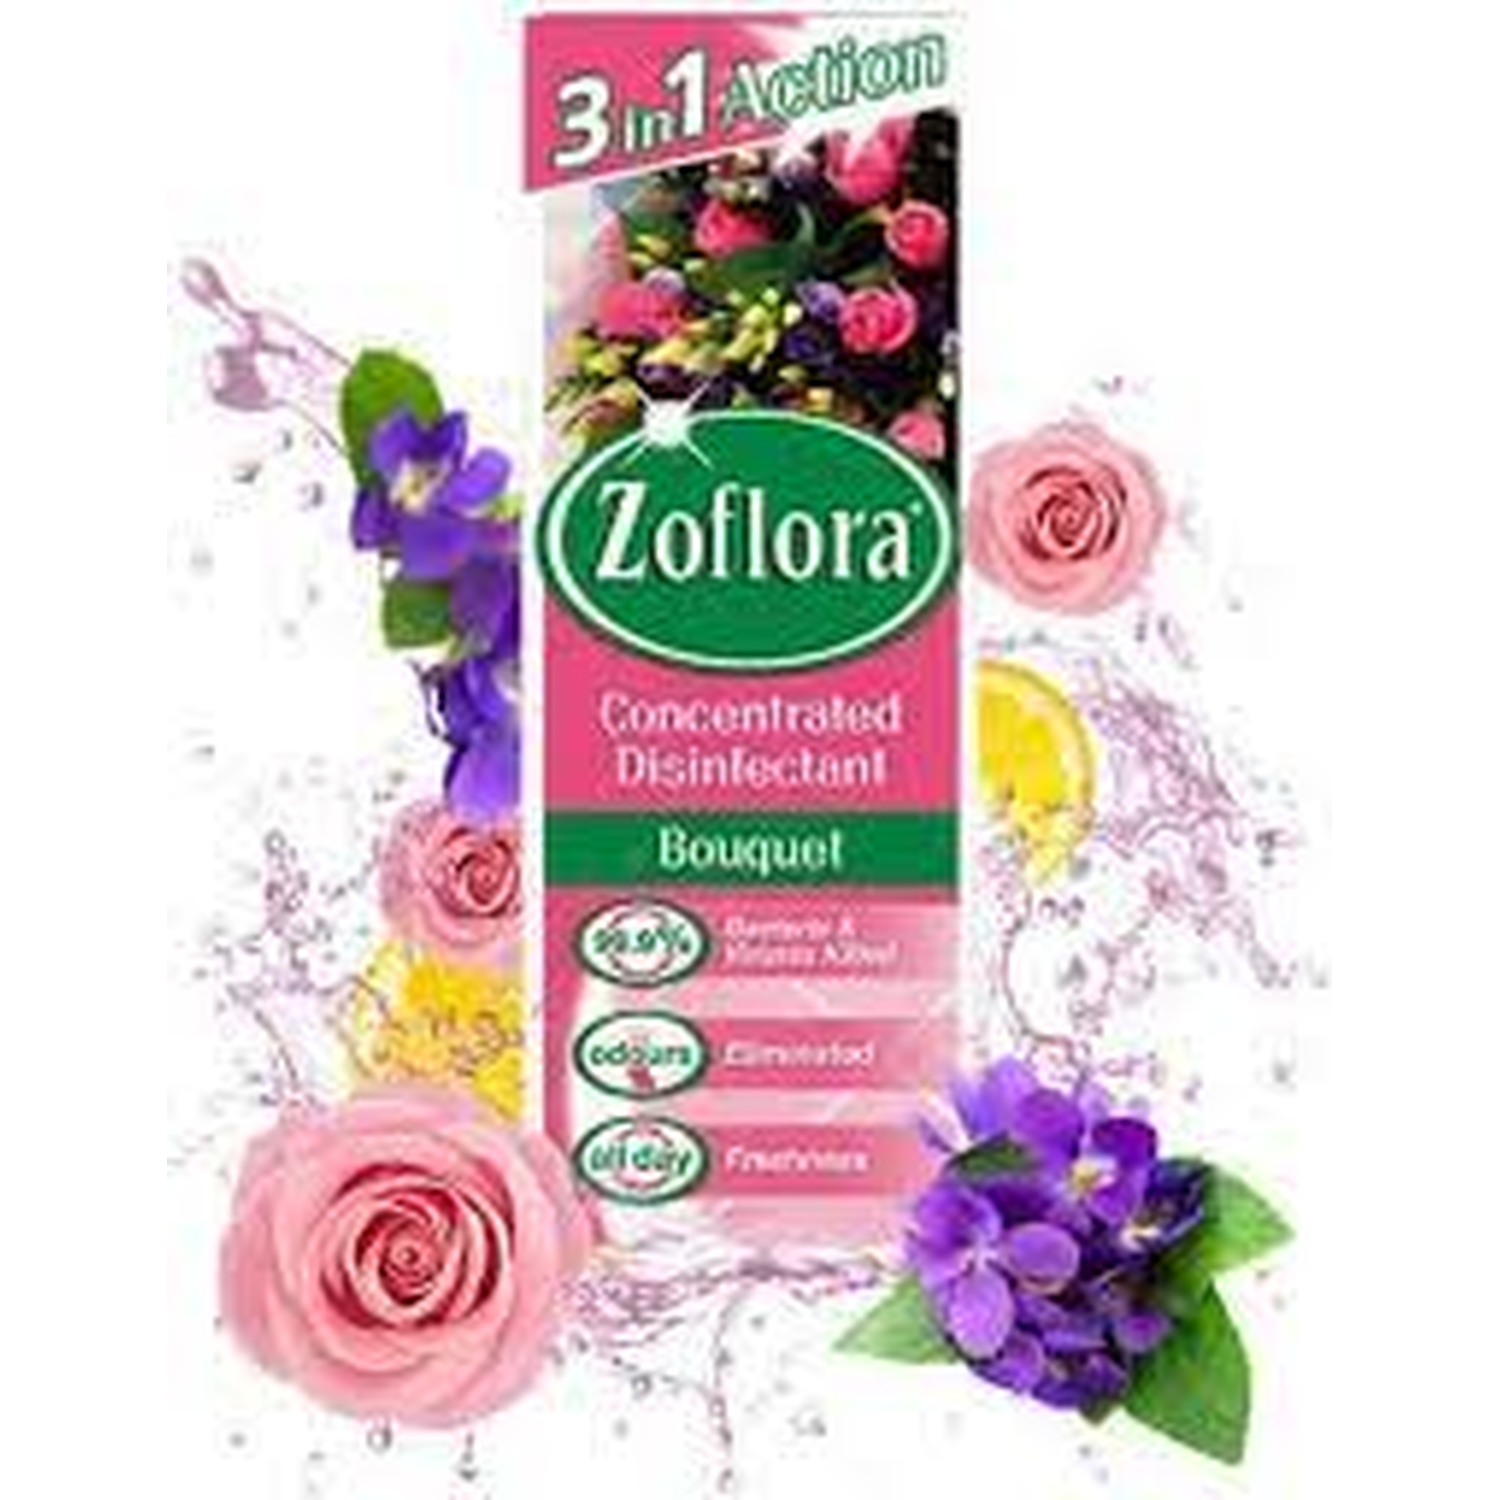 Zoflora Concentrated Disinfectant - Bouquet Image